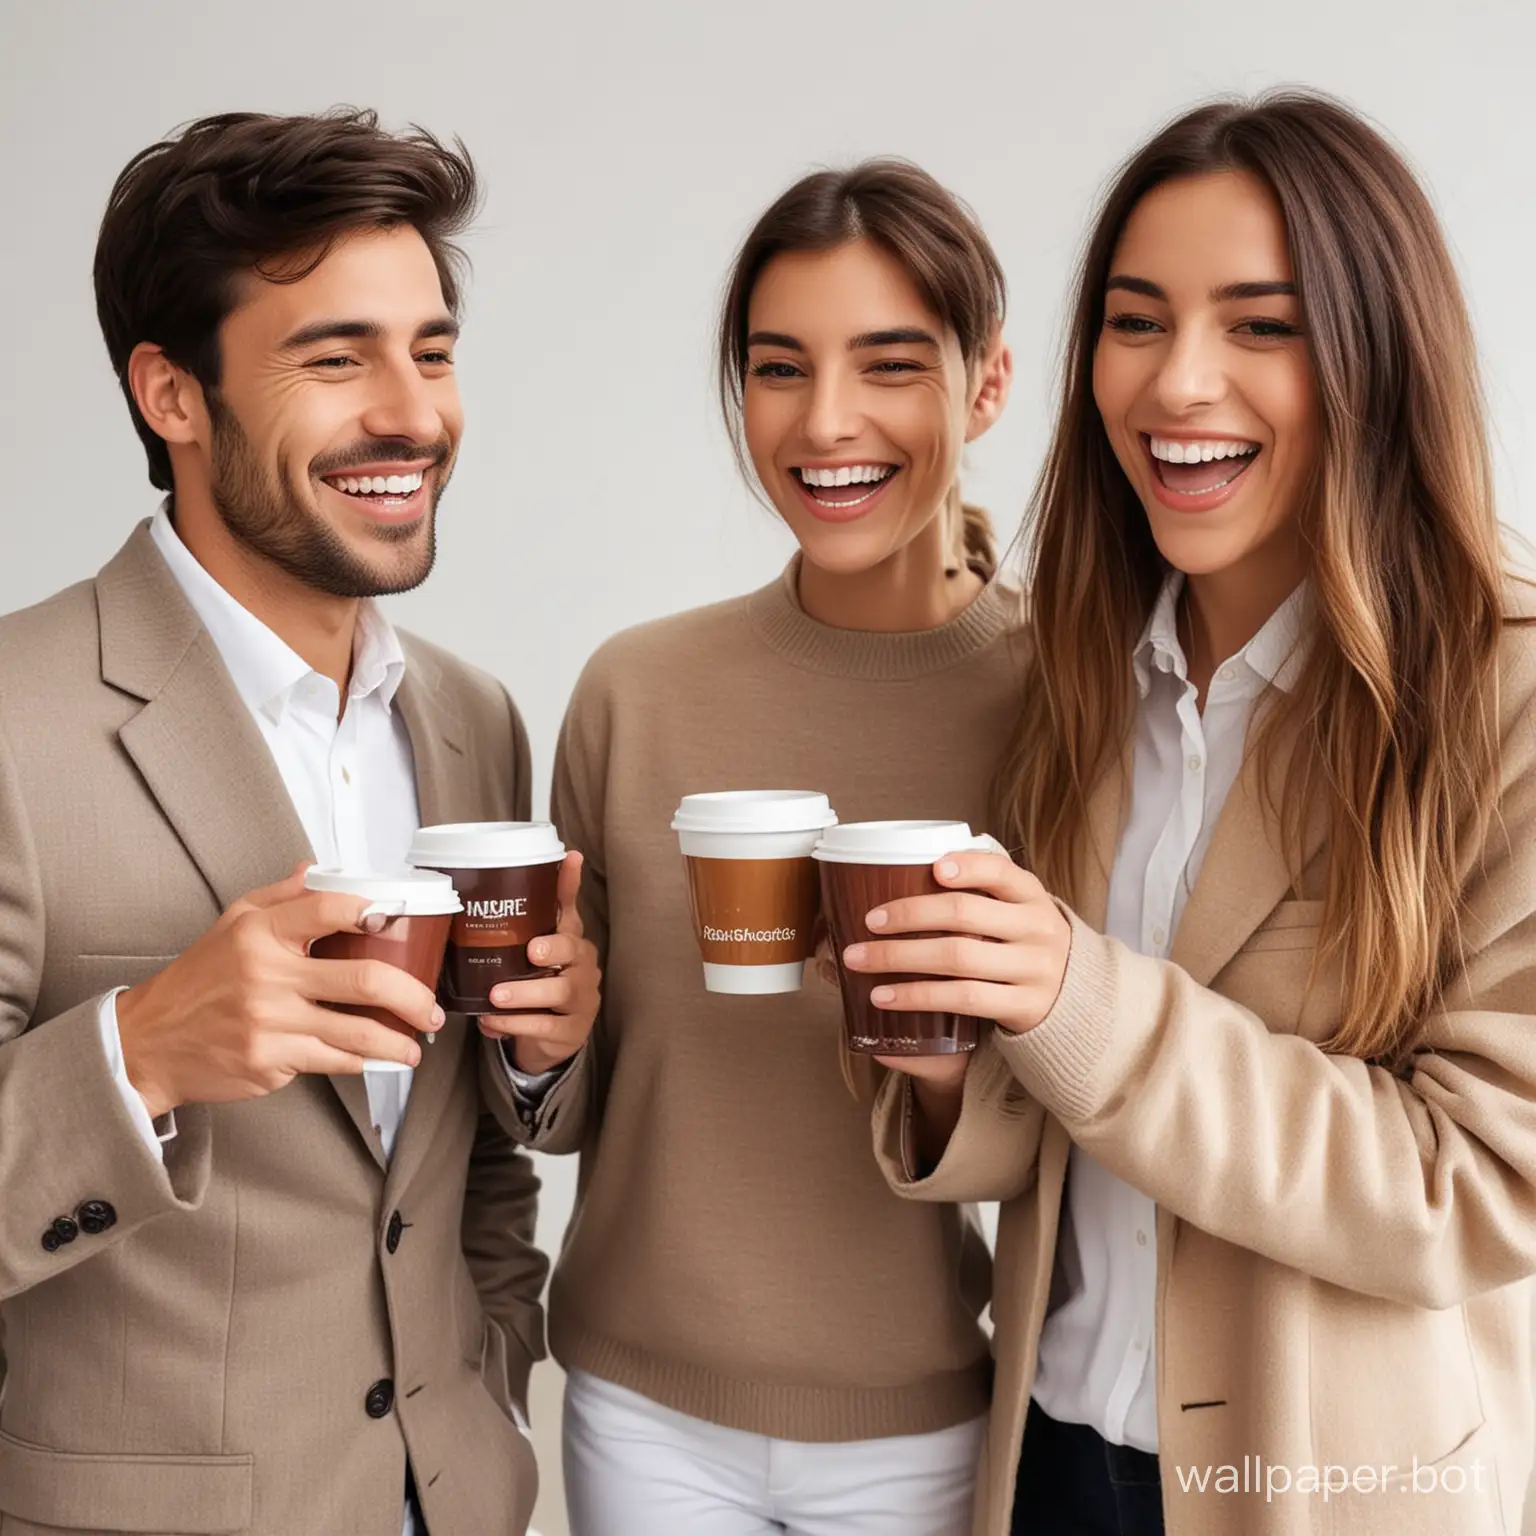 Generate scenes of oneself sharing different brands of coffee with friends or colleagues, laughing in the office, holding coffee cups in hand to drink coffee. The coffee should be brown, and at least three people should be involved.